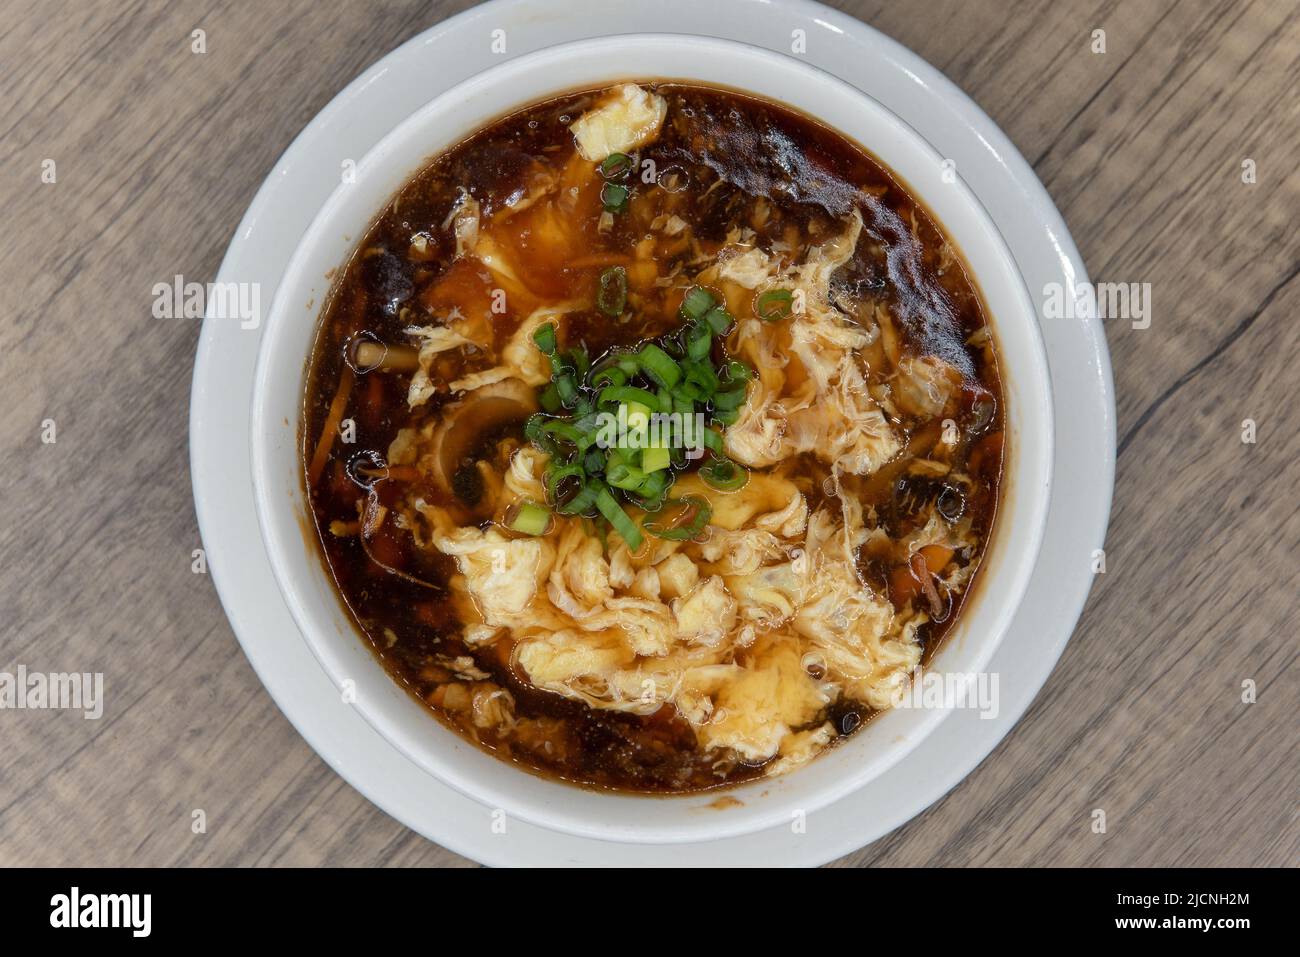 Overhead view of spicy and generous bowl of hot and sour soup for a hearty Chinese food meal. Stock Photo